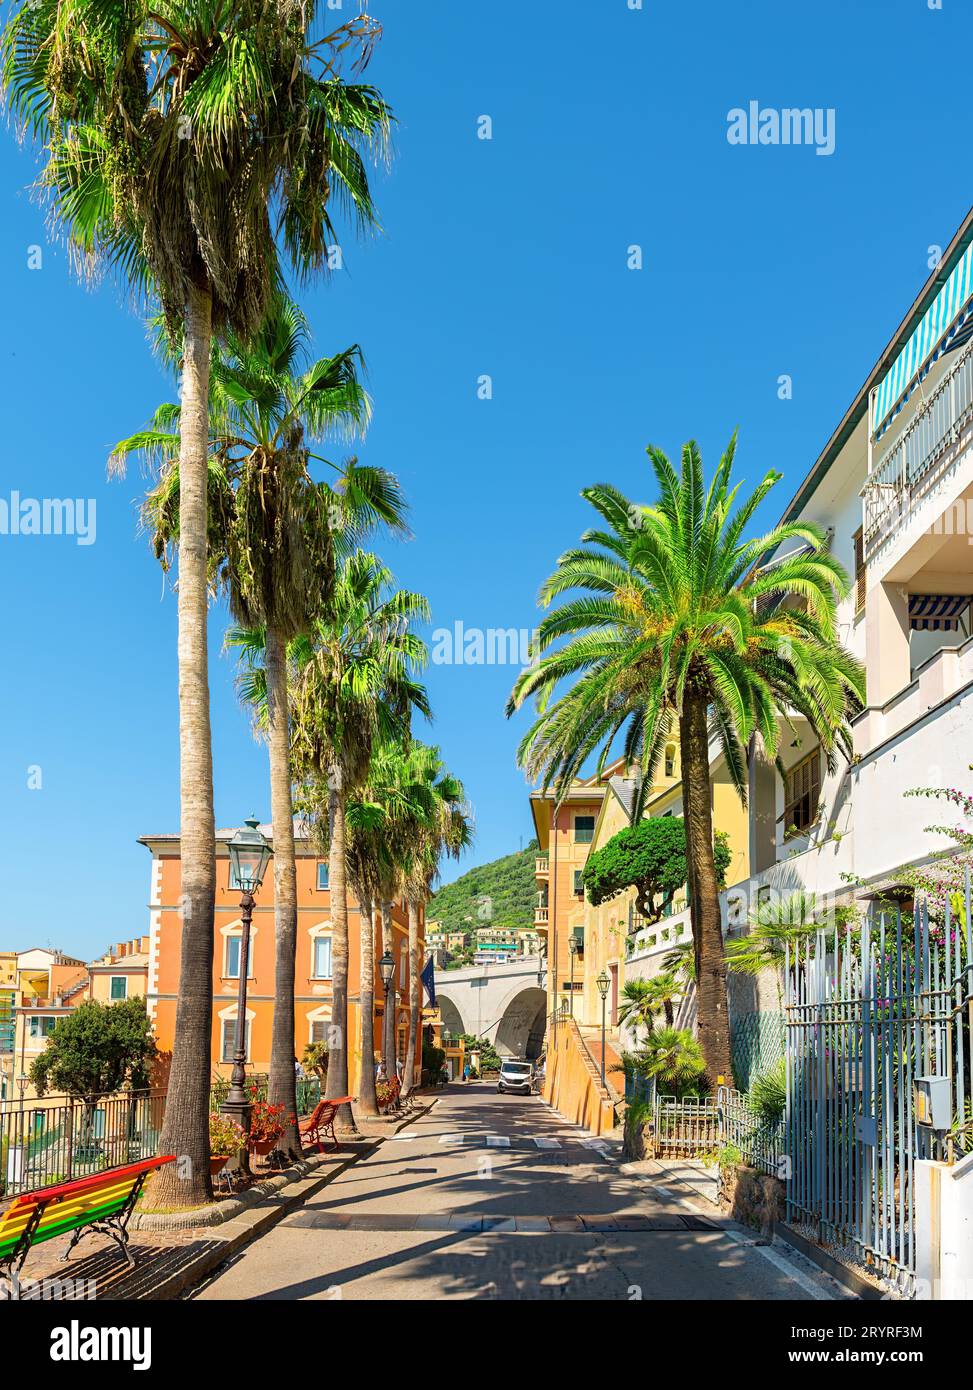 Road with palm trees in the city of Bogliasco in southern Italy Stock Photo